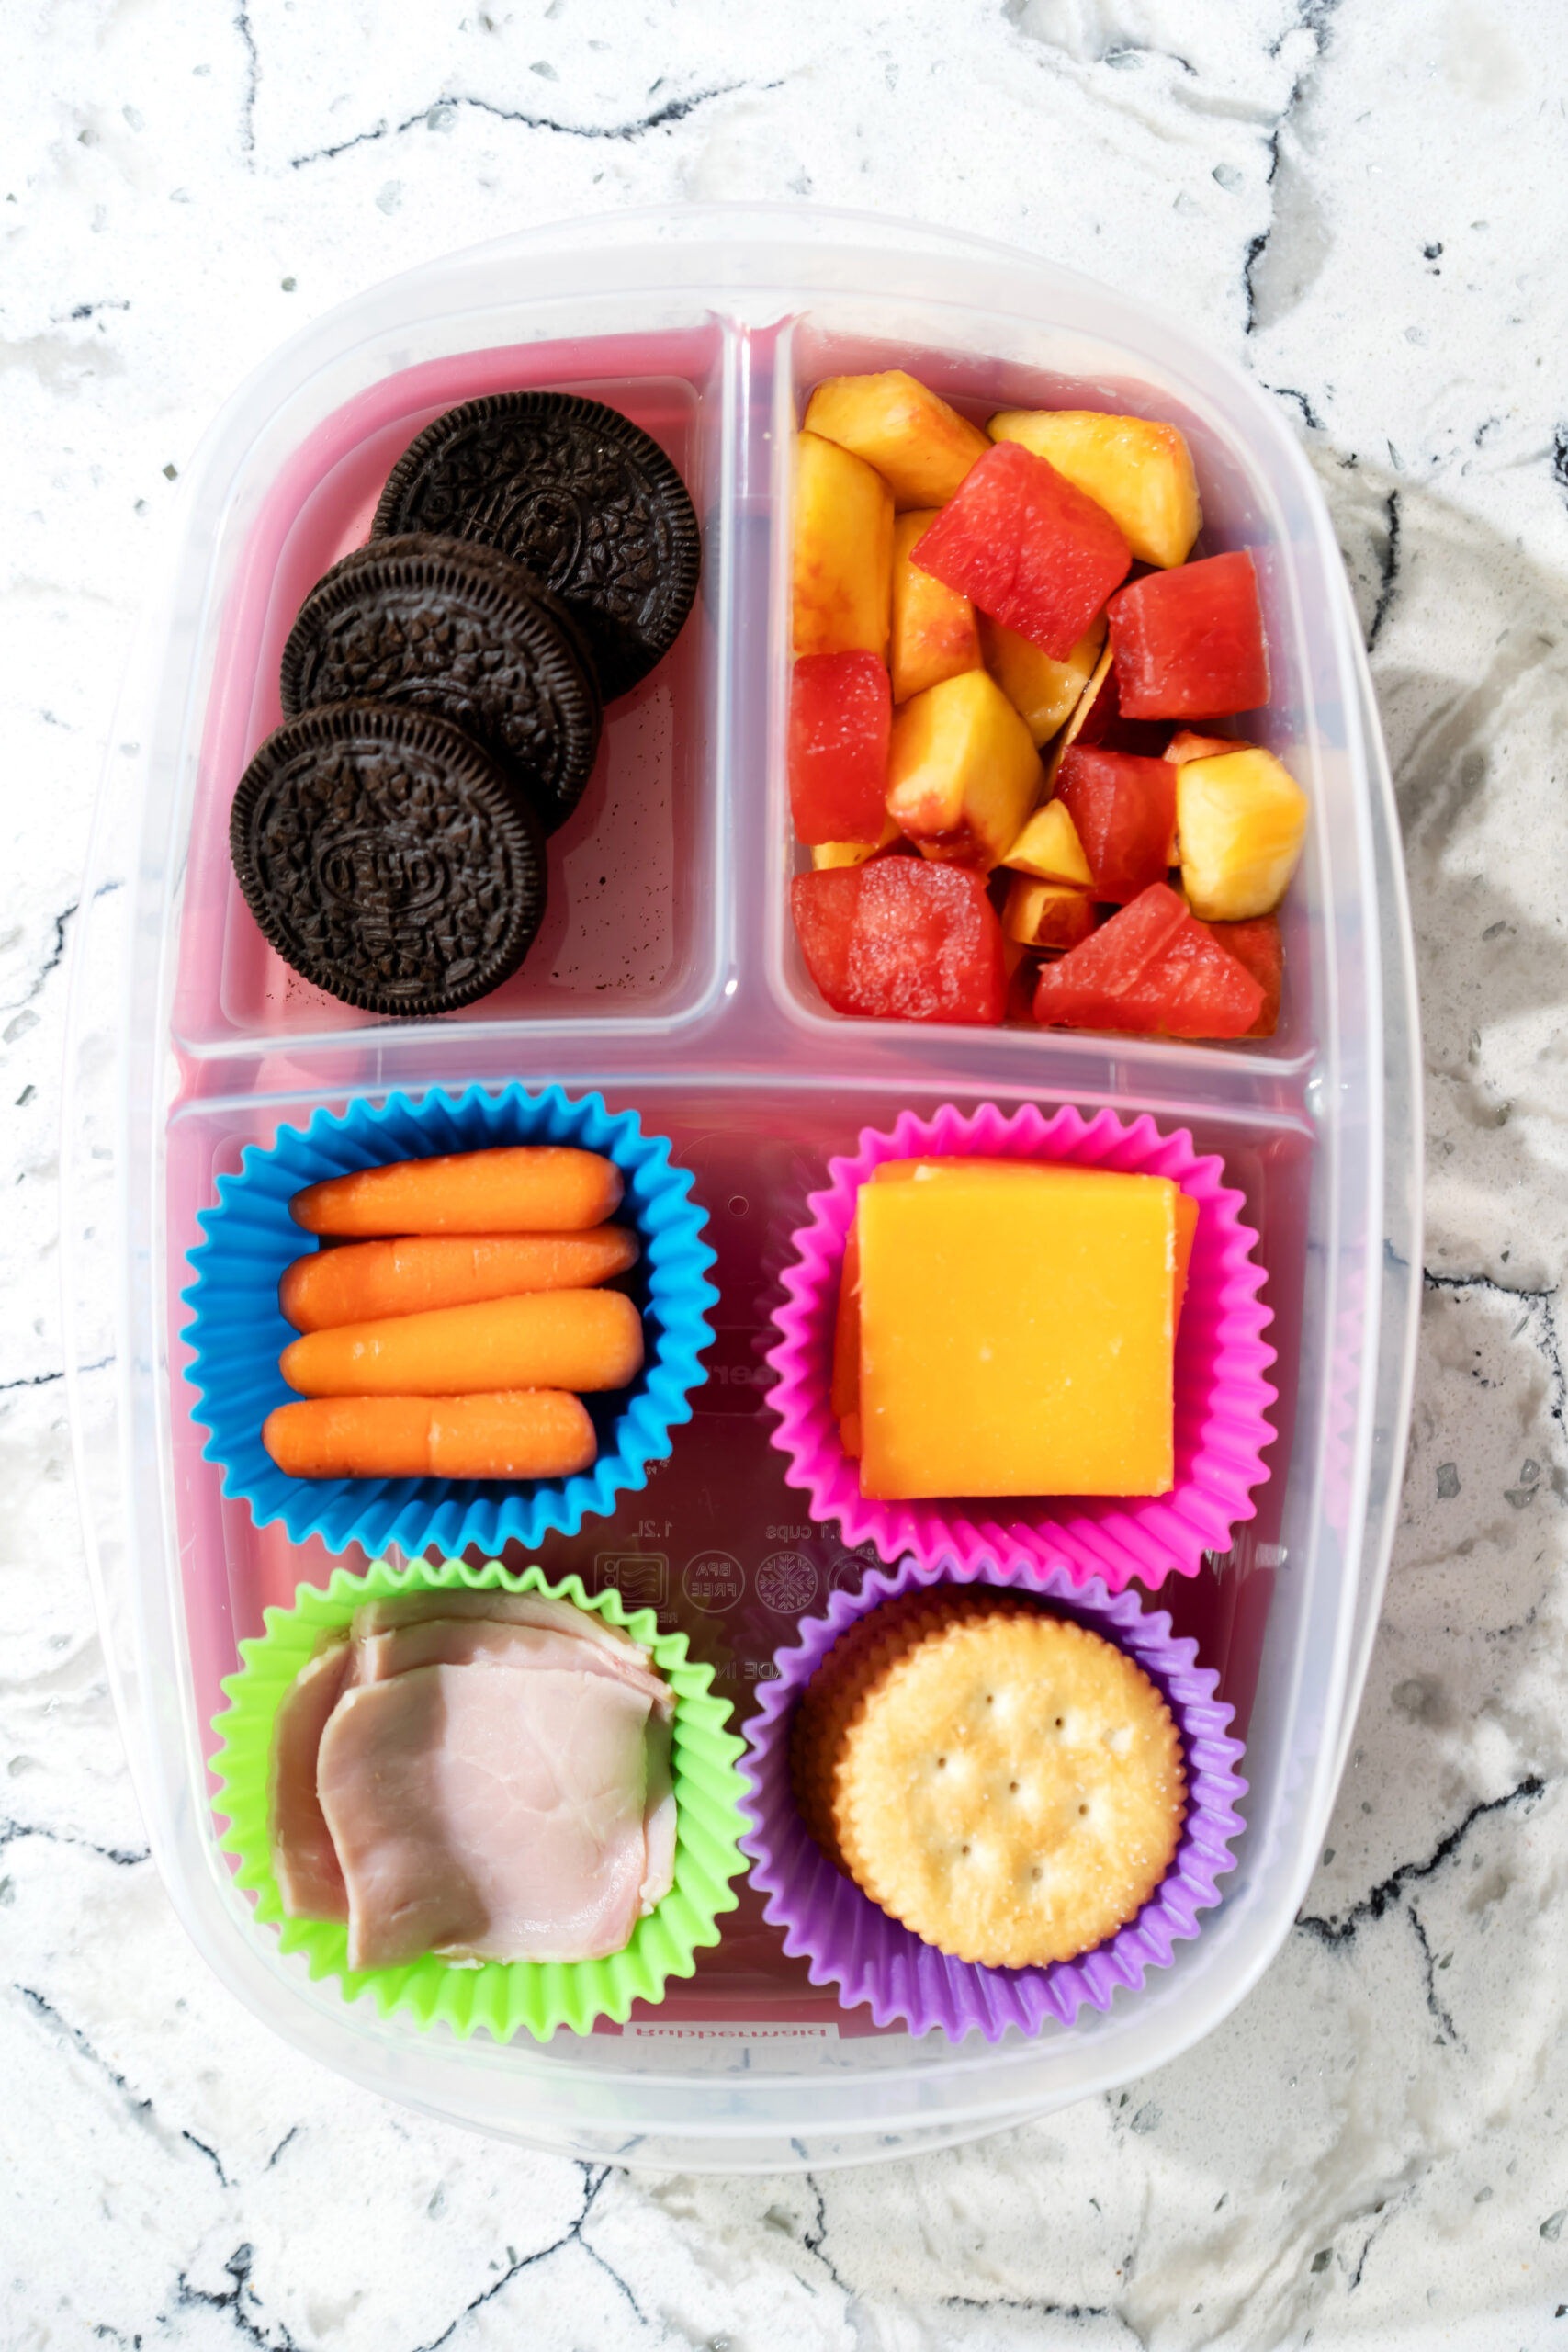 https://realfoodbydad.com/wp-content/uploads/2022/08/DIY-Lunchable-The-Classic-Real-Food-by-Dad-scaled.jpg